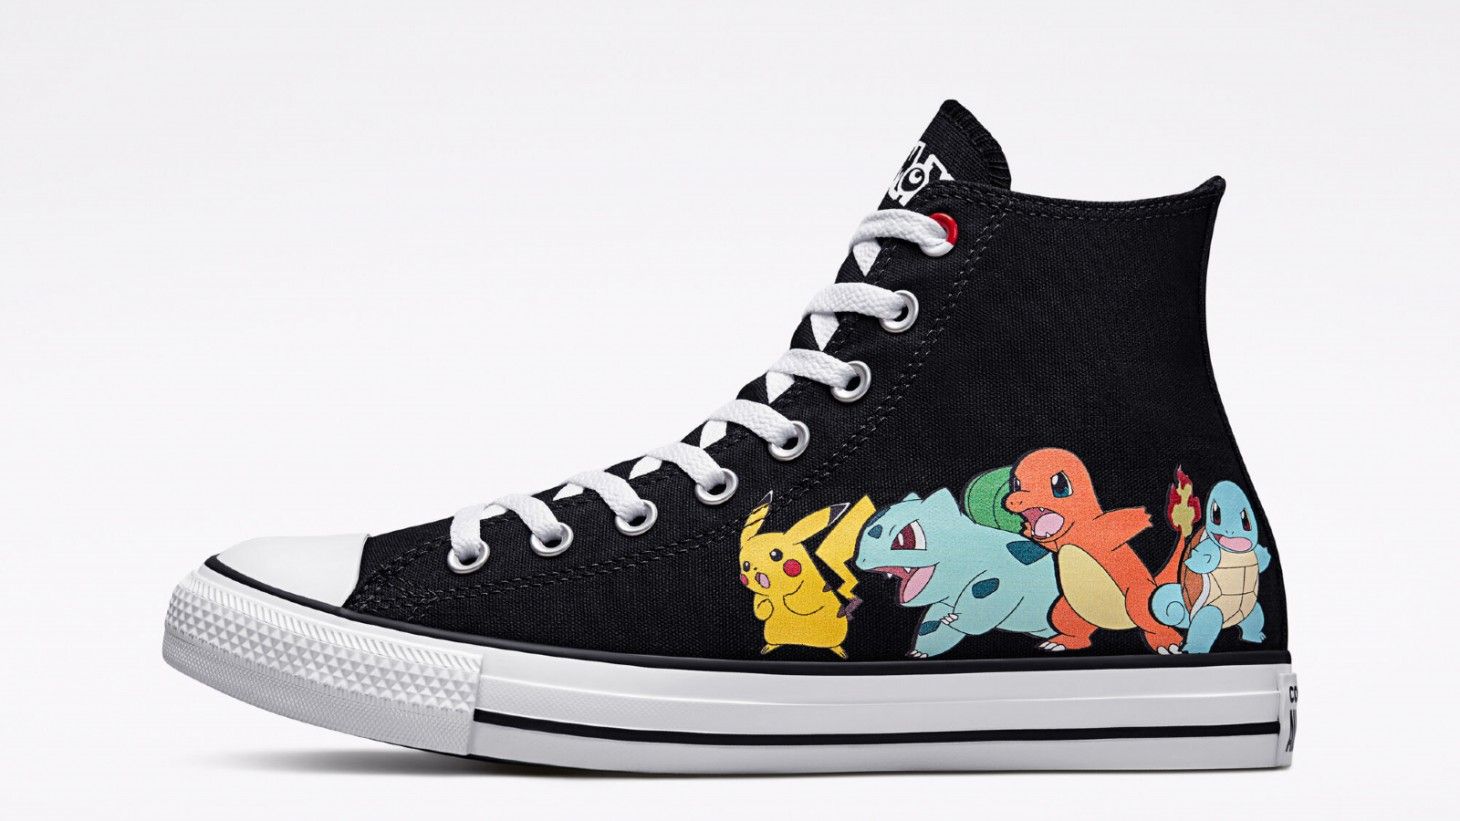 Pokemon x Converse Shoe and Clothing Collection Launches - pokemonwe.com